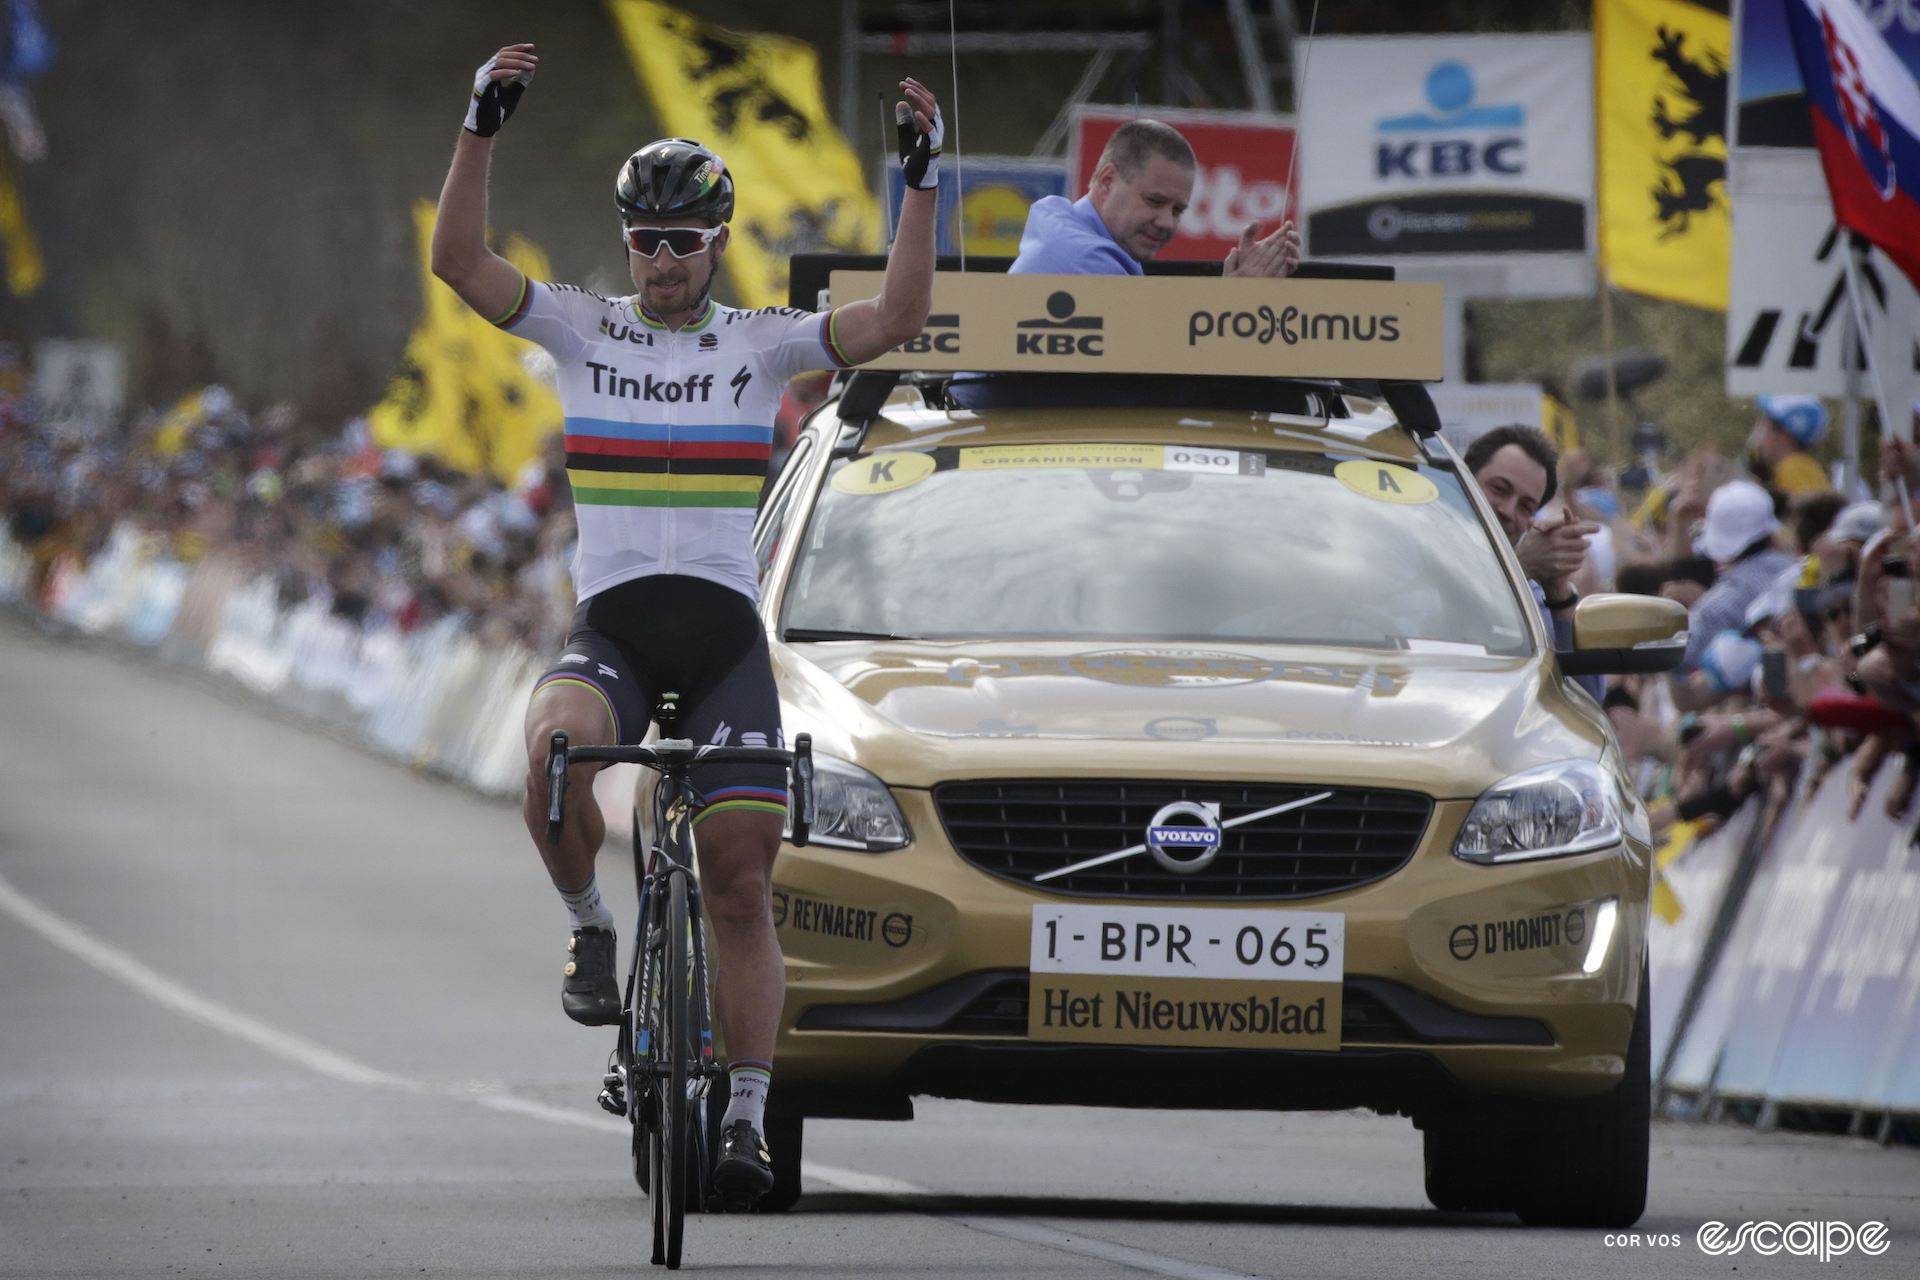 Peter Sagan celebrates winning the 2016 Tour of Flanders, solo, with two arms in the air, and the race director's car immediately behind him. The race director is clapping.